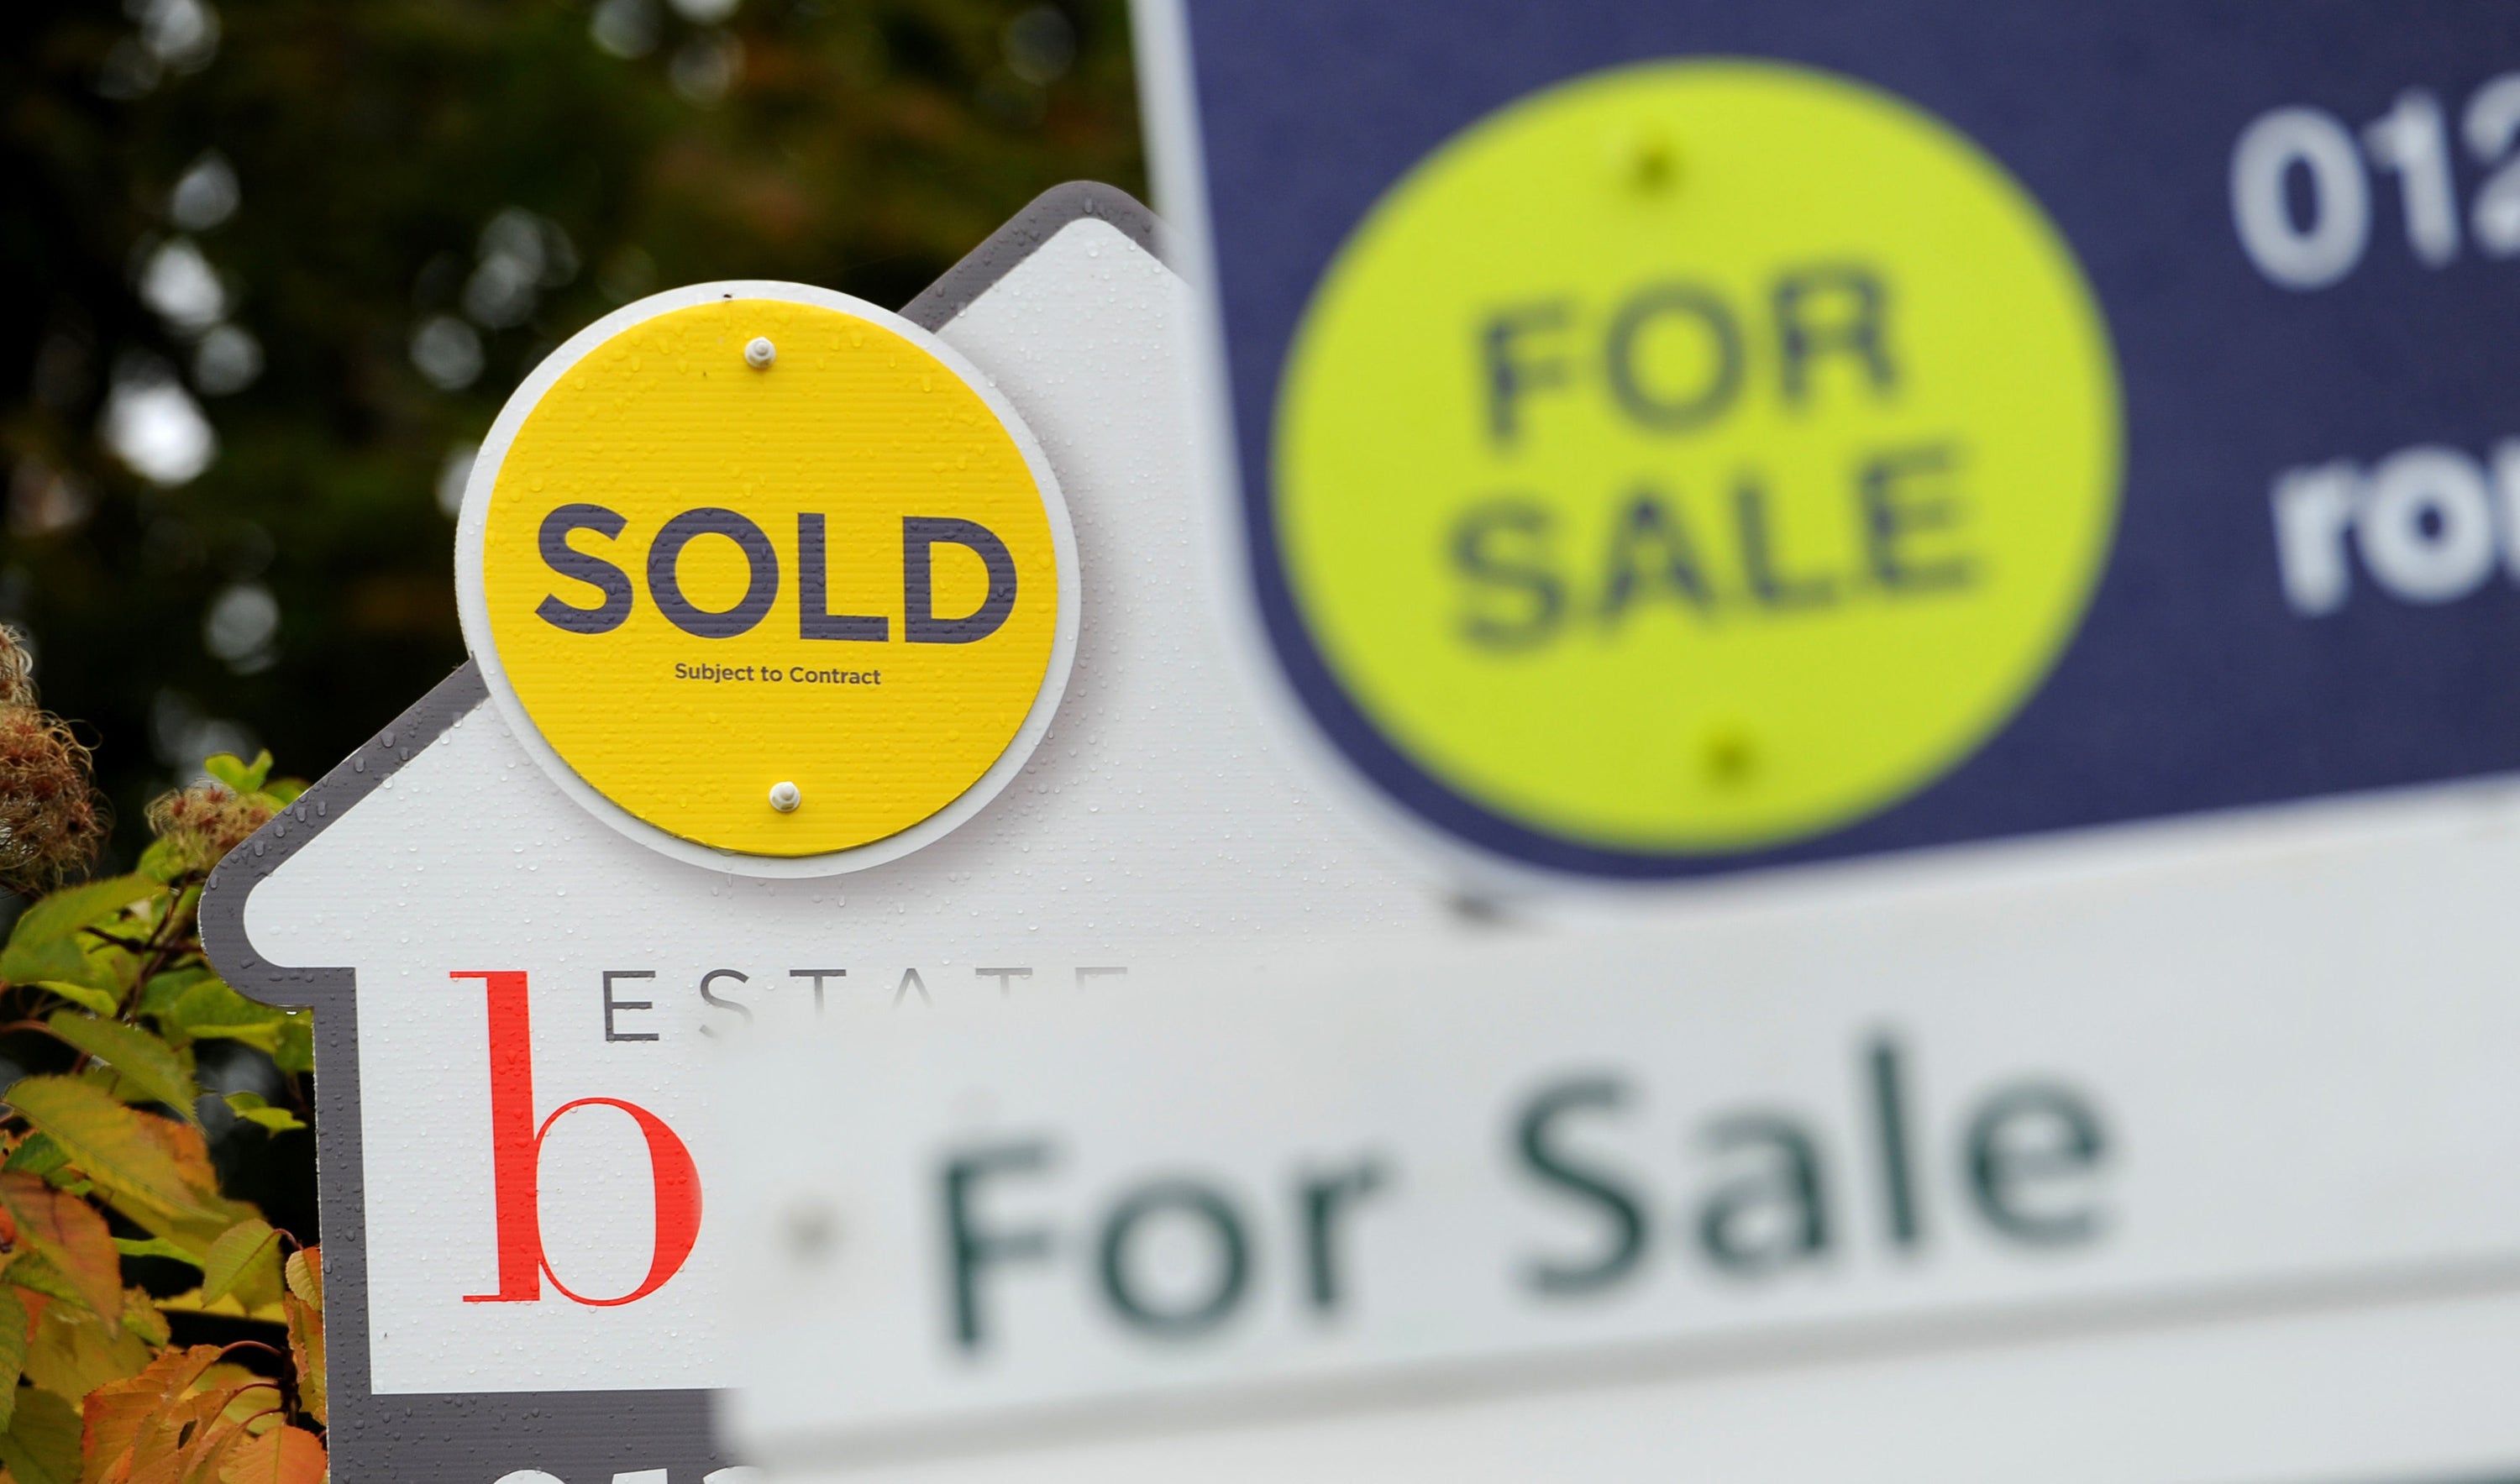 House price growth has started to slow, according to the Nationwide Building Society